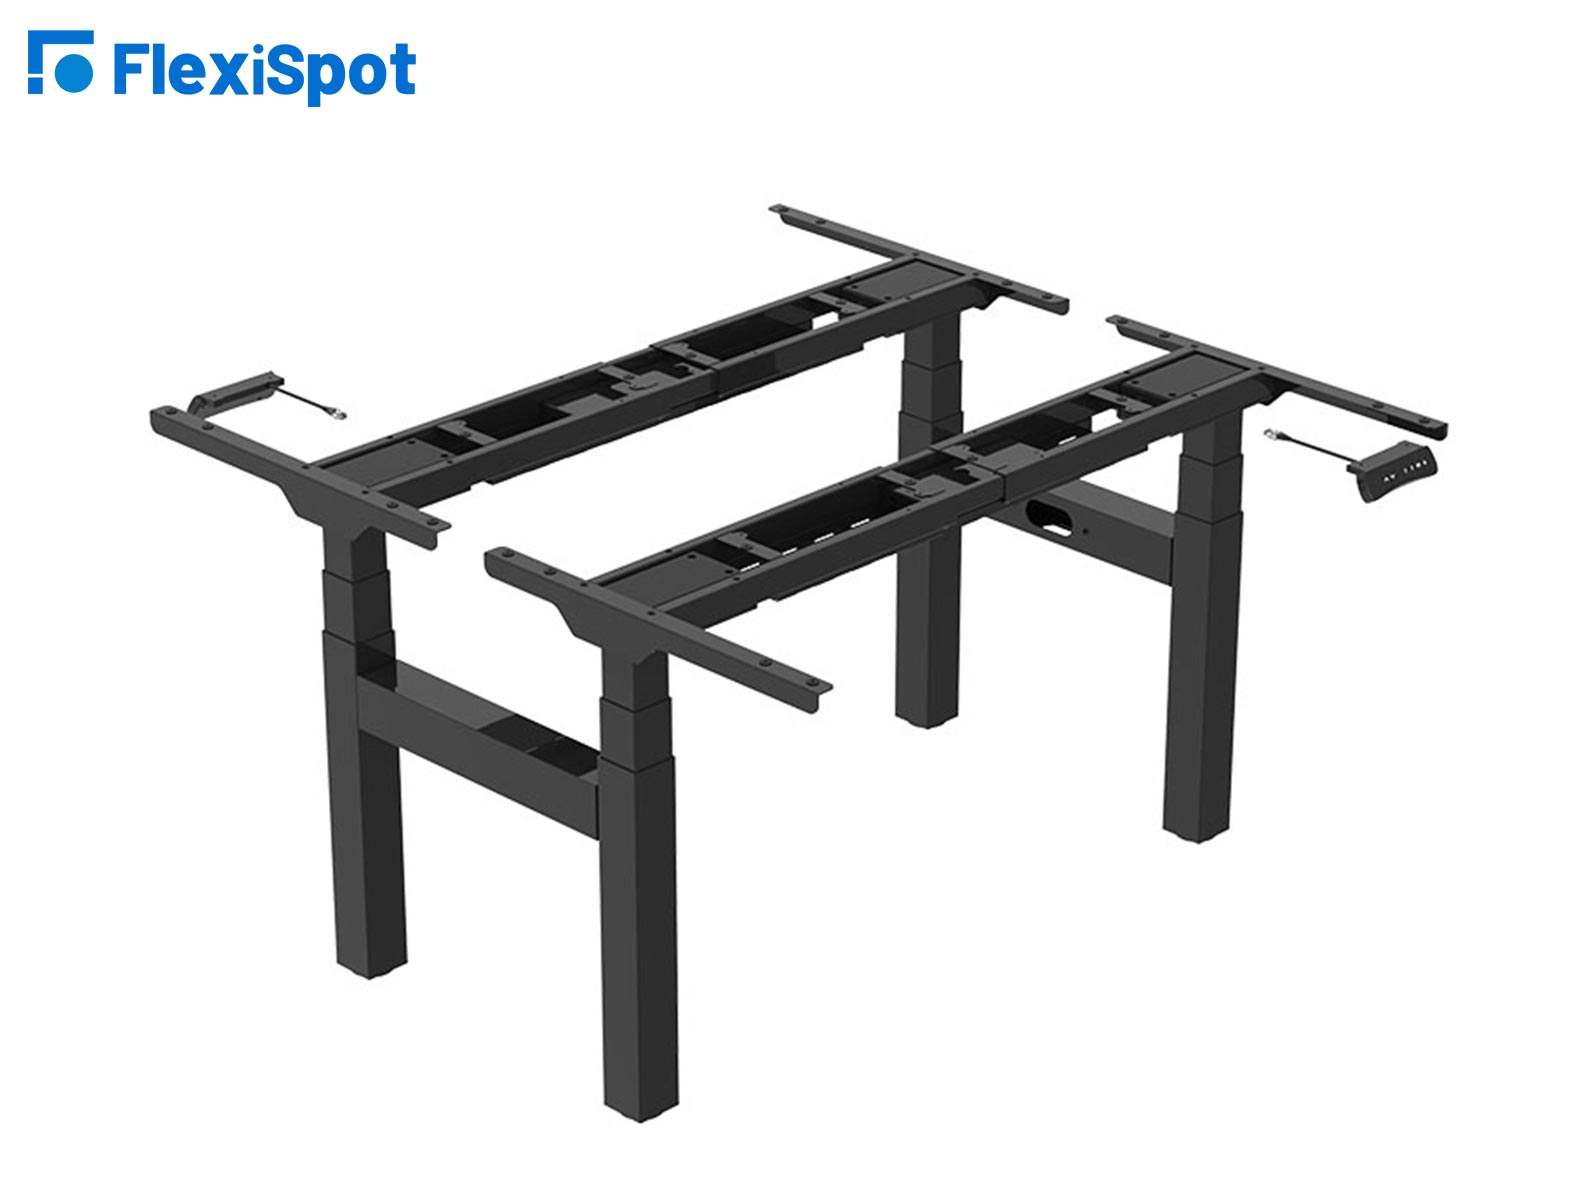 Flexispot-E7-sit-stand-dual-bench-standing-desk-height-adjustable-workstation-cluster-of-2a-1580x1200